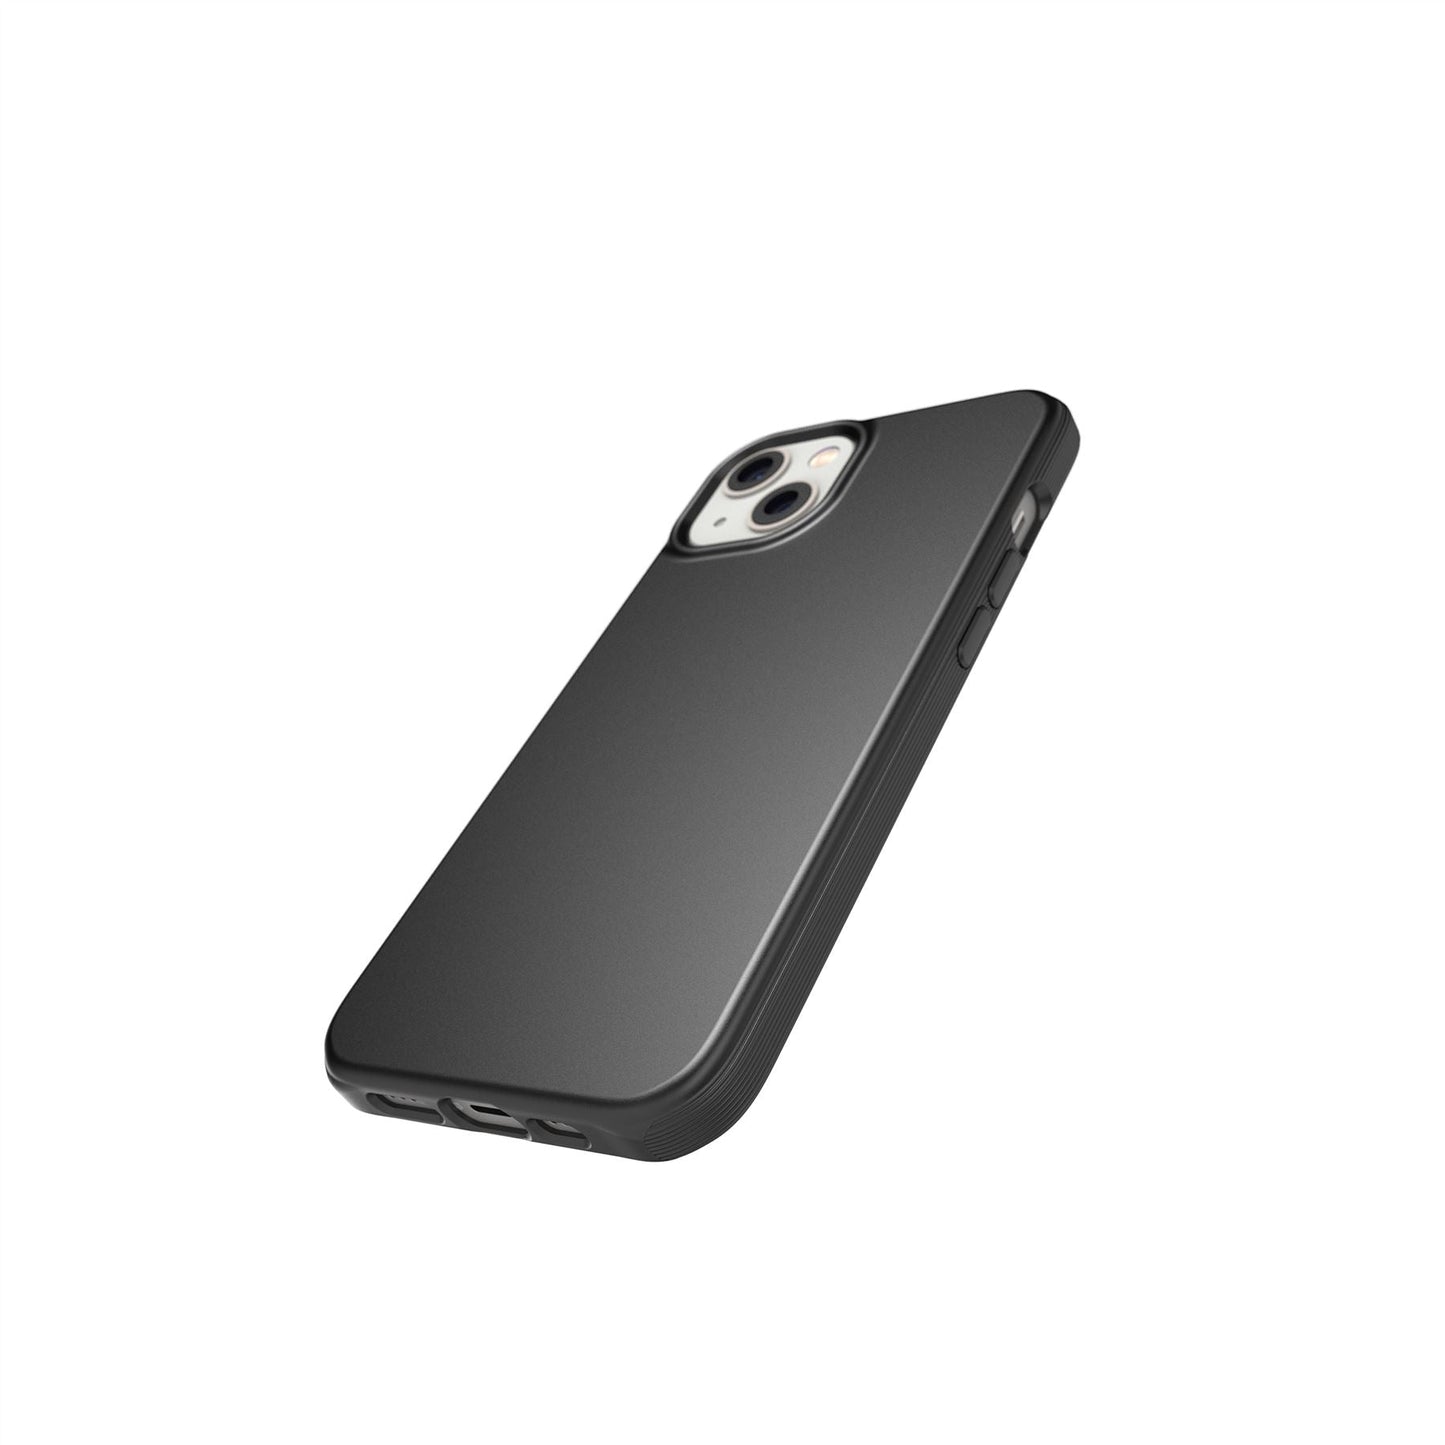 Tech 21 Evo Lite For iPhone 12 - Charcoal Black